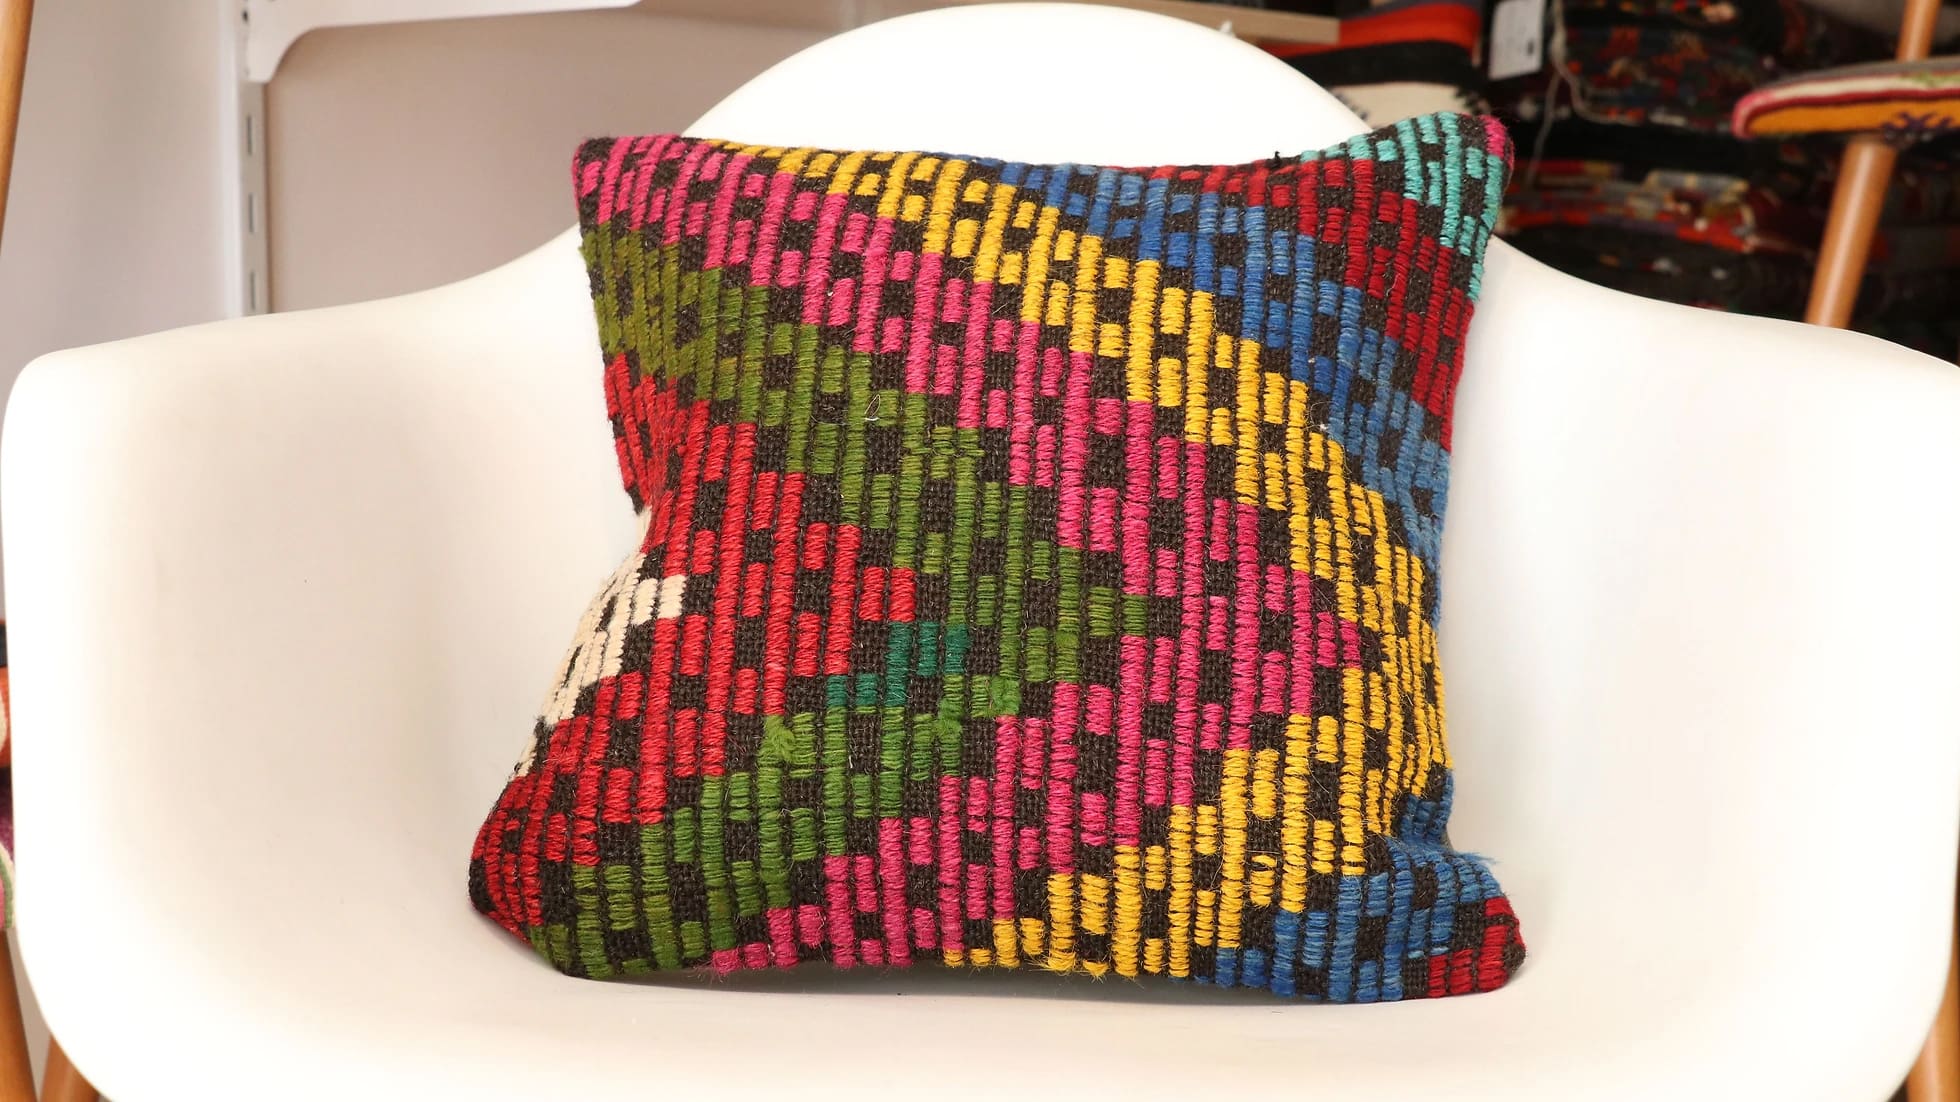 kilim upholstered pillow woven by local women artisans in colorful cecim style